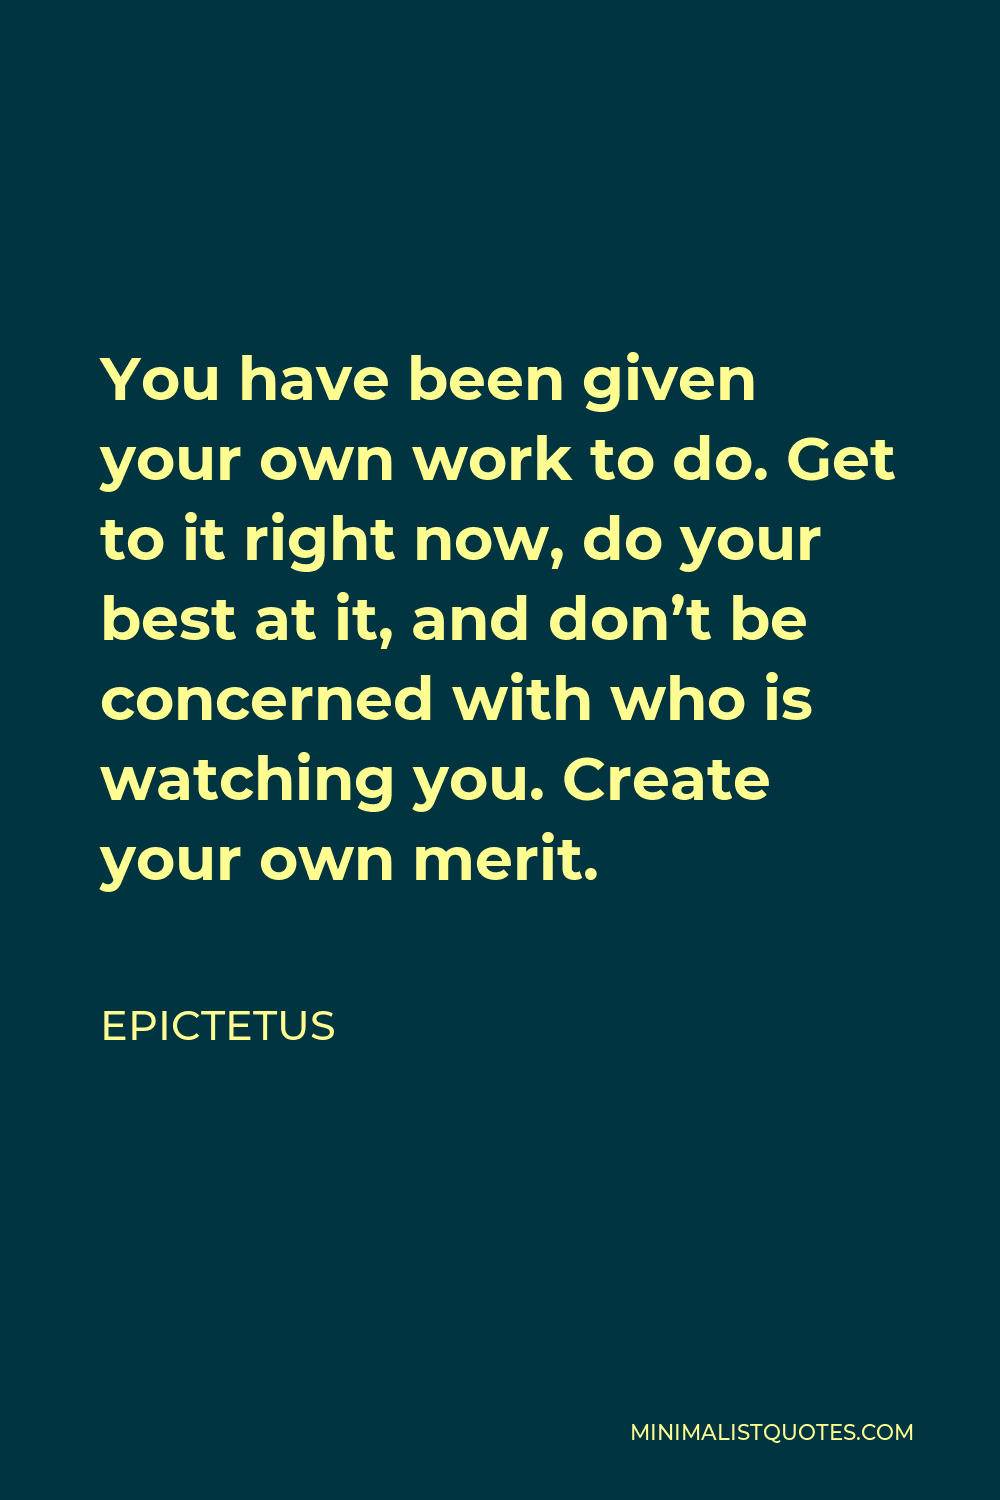 Epictetus Quote - You have been given your own work to do. Get to it right now, do your best at it, and don’t be concerned with who is watching you. Create your own merit.